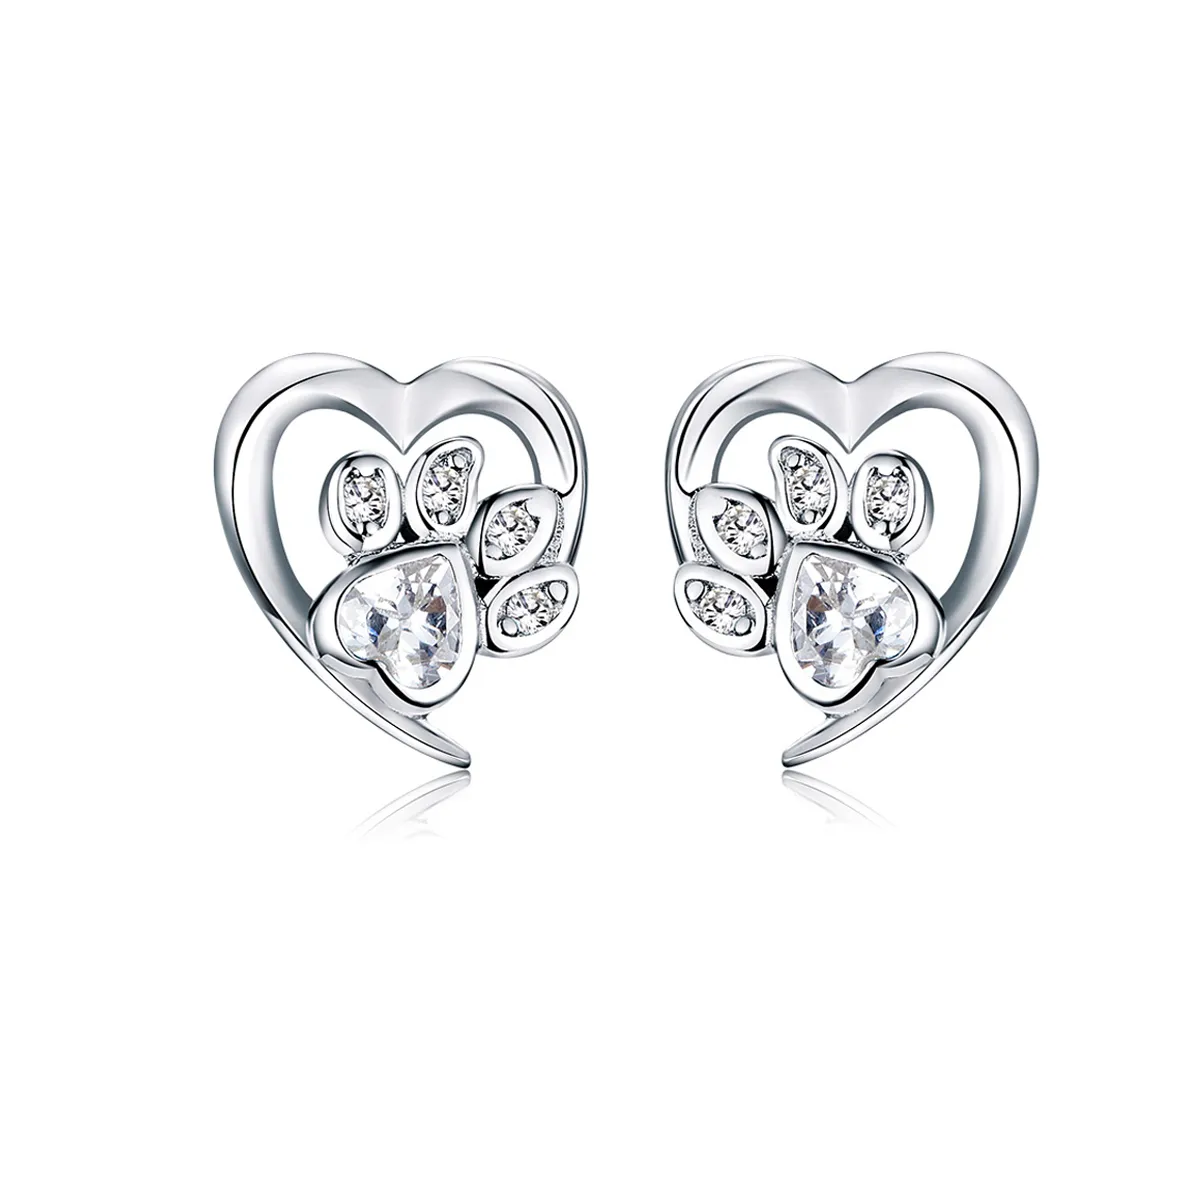 Pandora Style Silver Caring Dog Paw Stud Earrings - SCE654-Wh